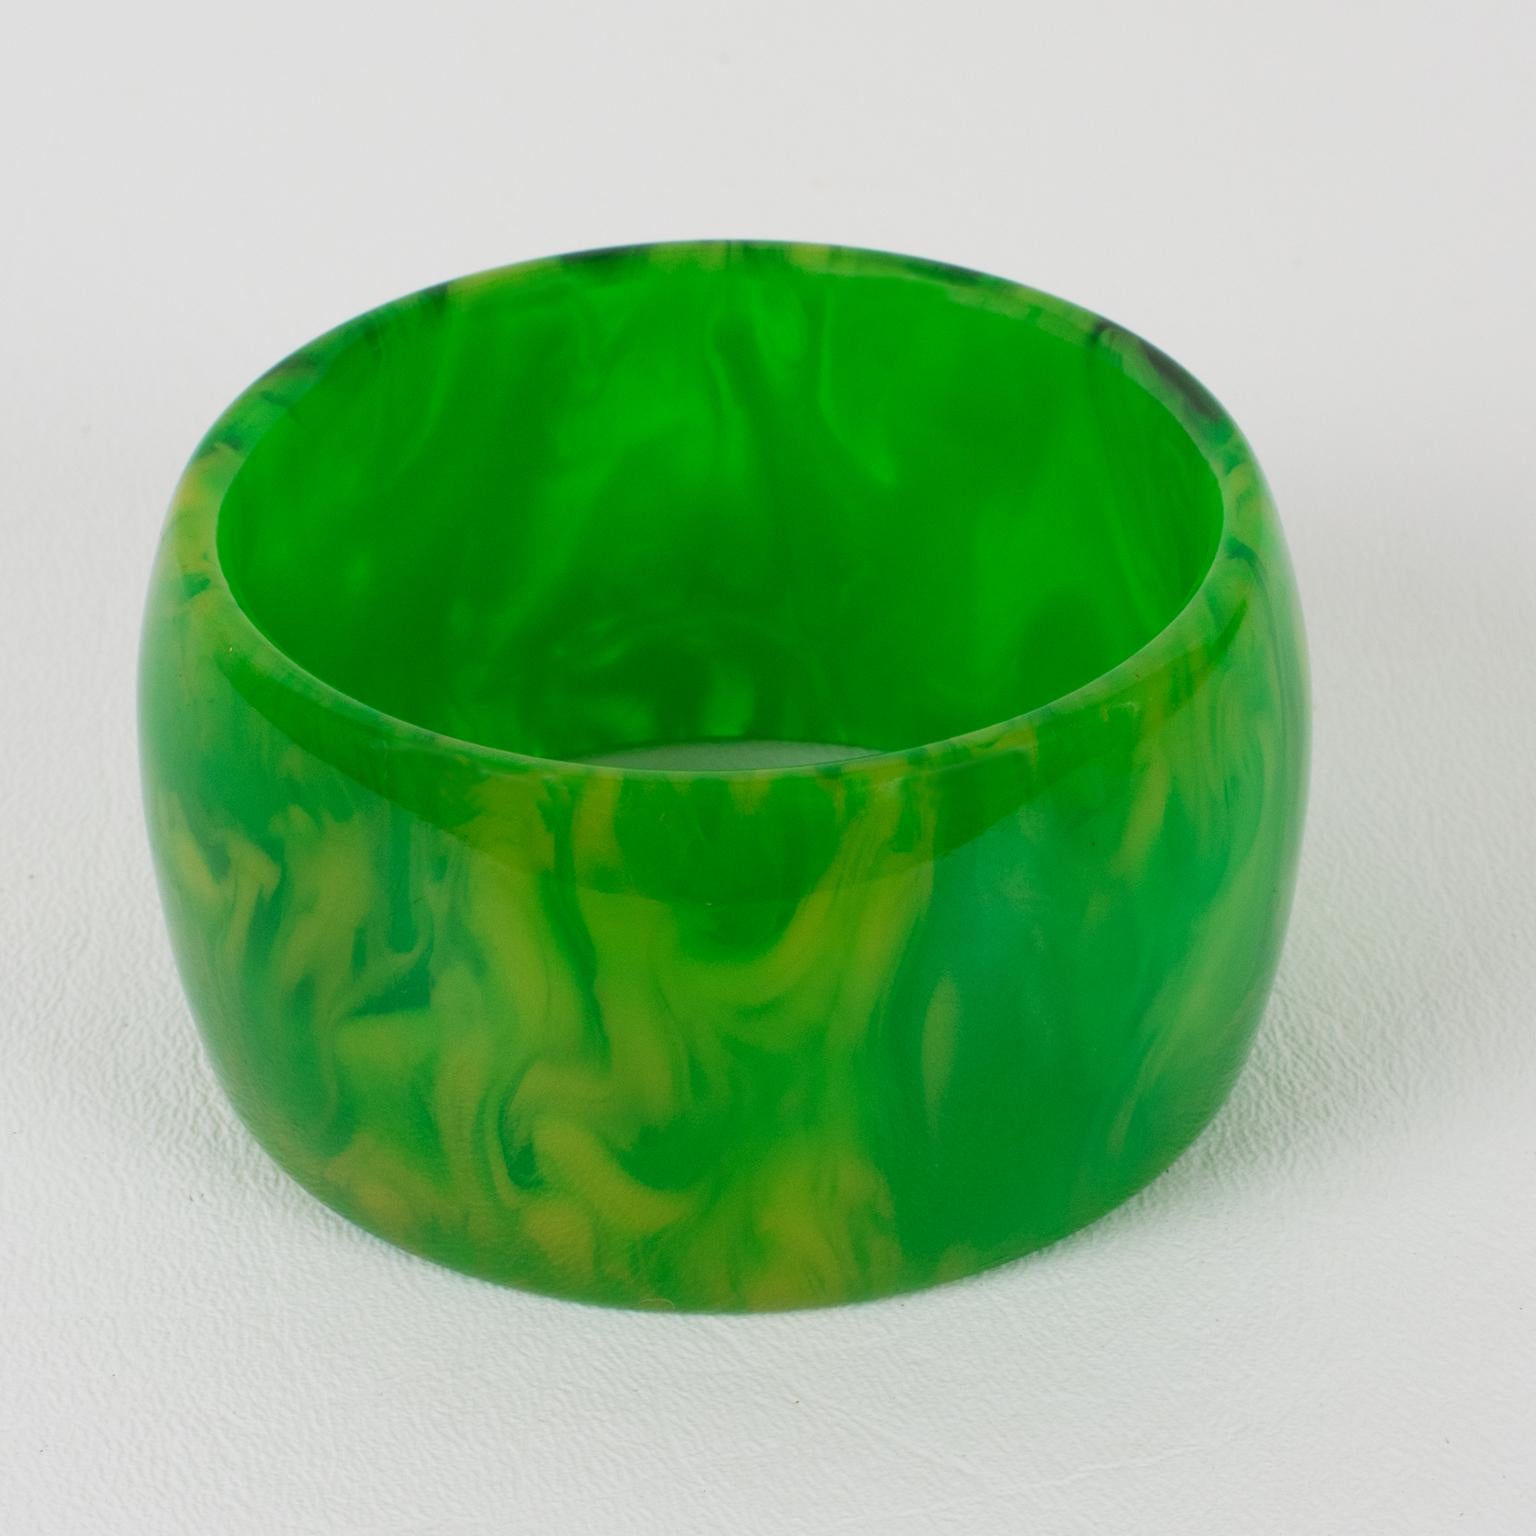 This gorgeous oversized green grass marble Bakelite bracelet bangle features a chunky wide domed shape. The piece boasts an intense green marble tone with yellow and white cloudy swirling and translucency. 
Measurements: Inside across is 2.57 in